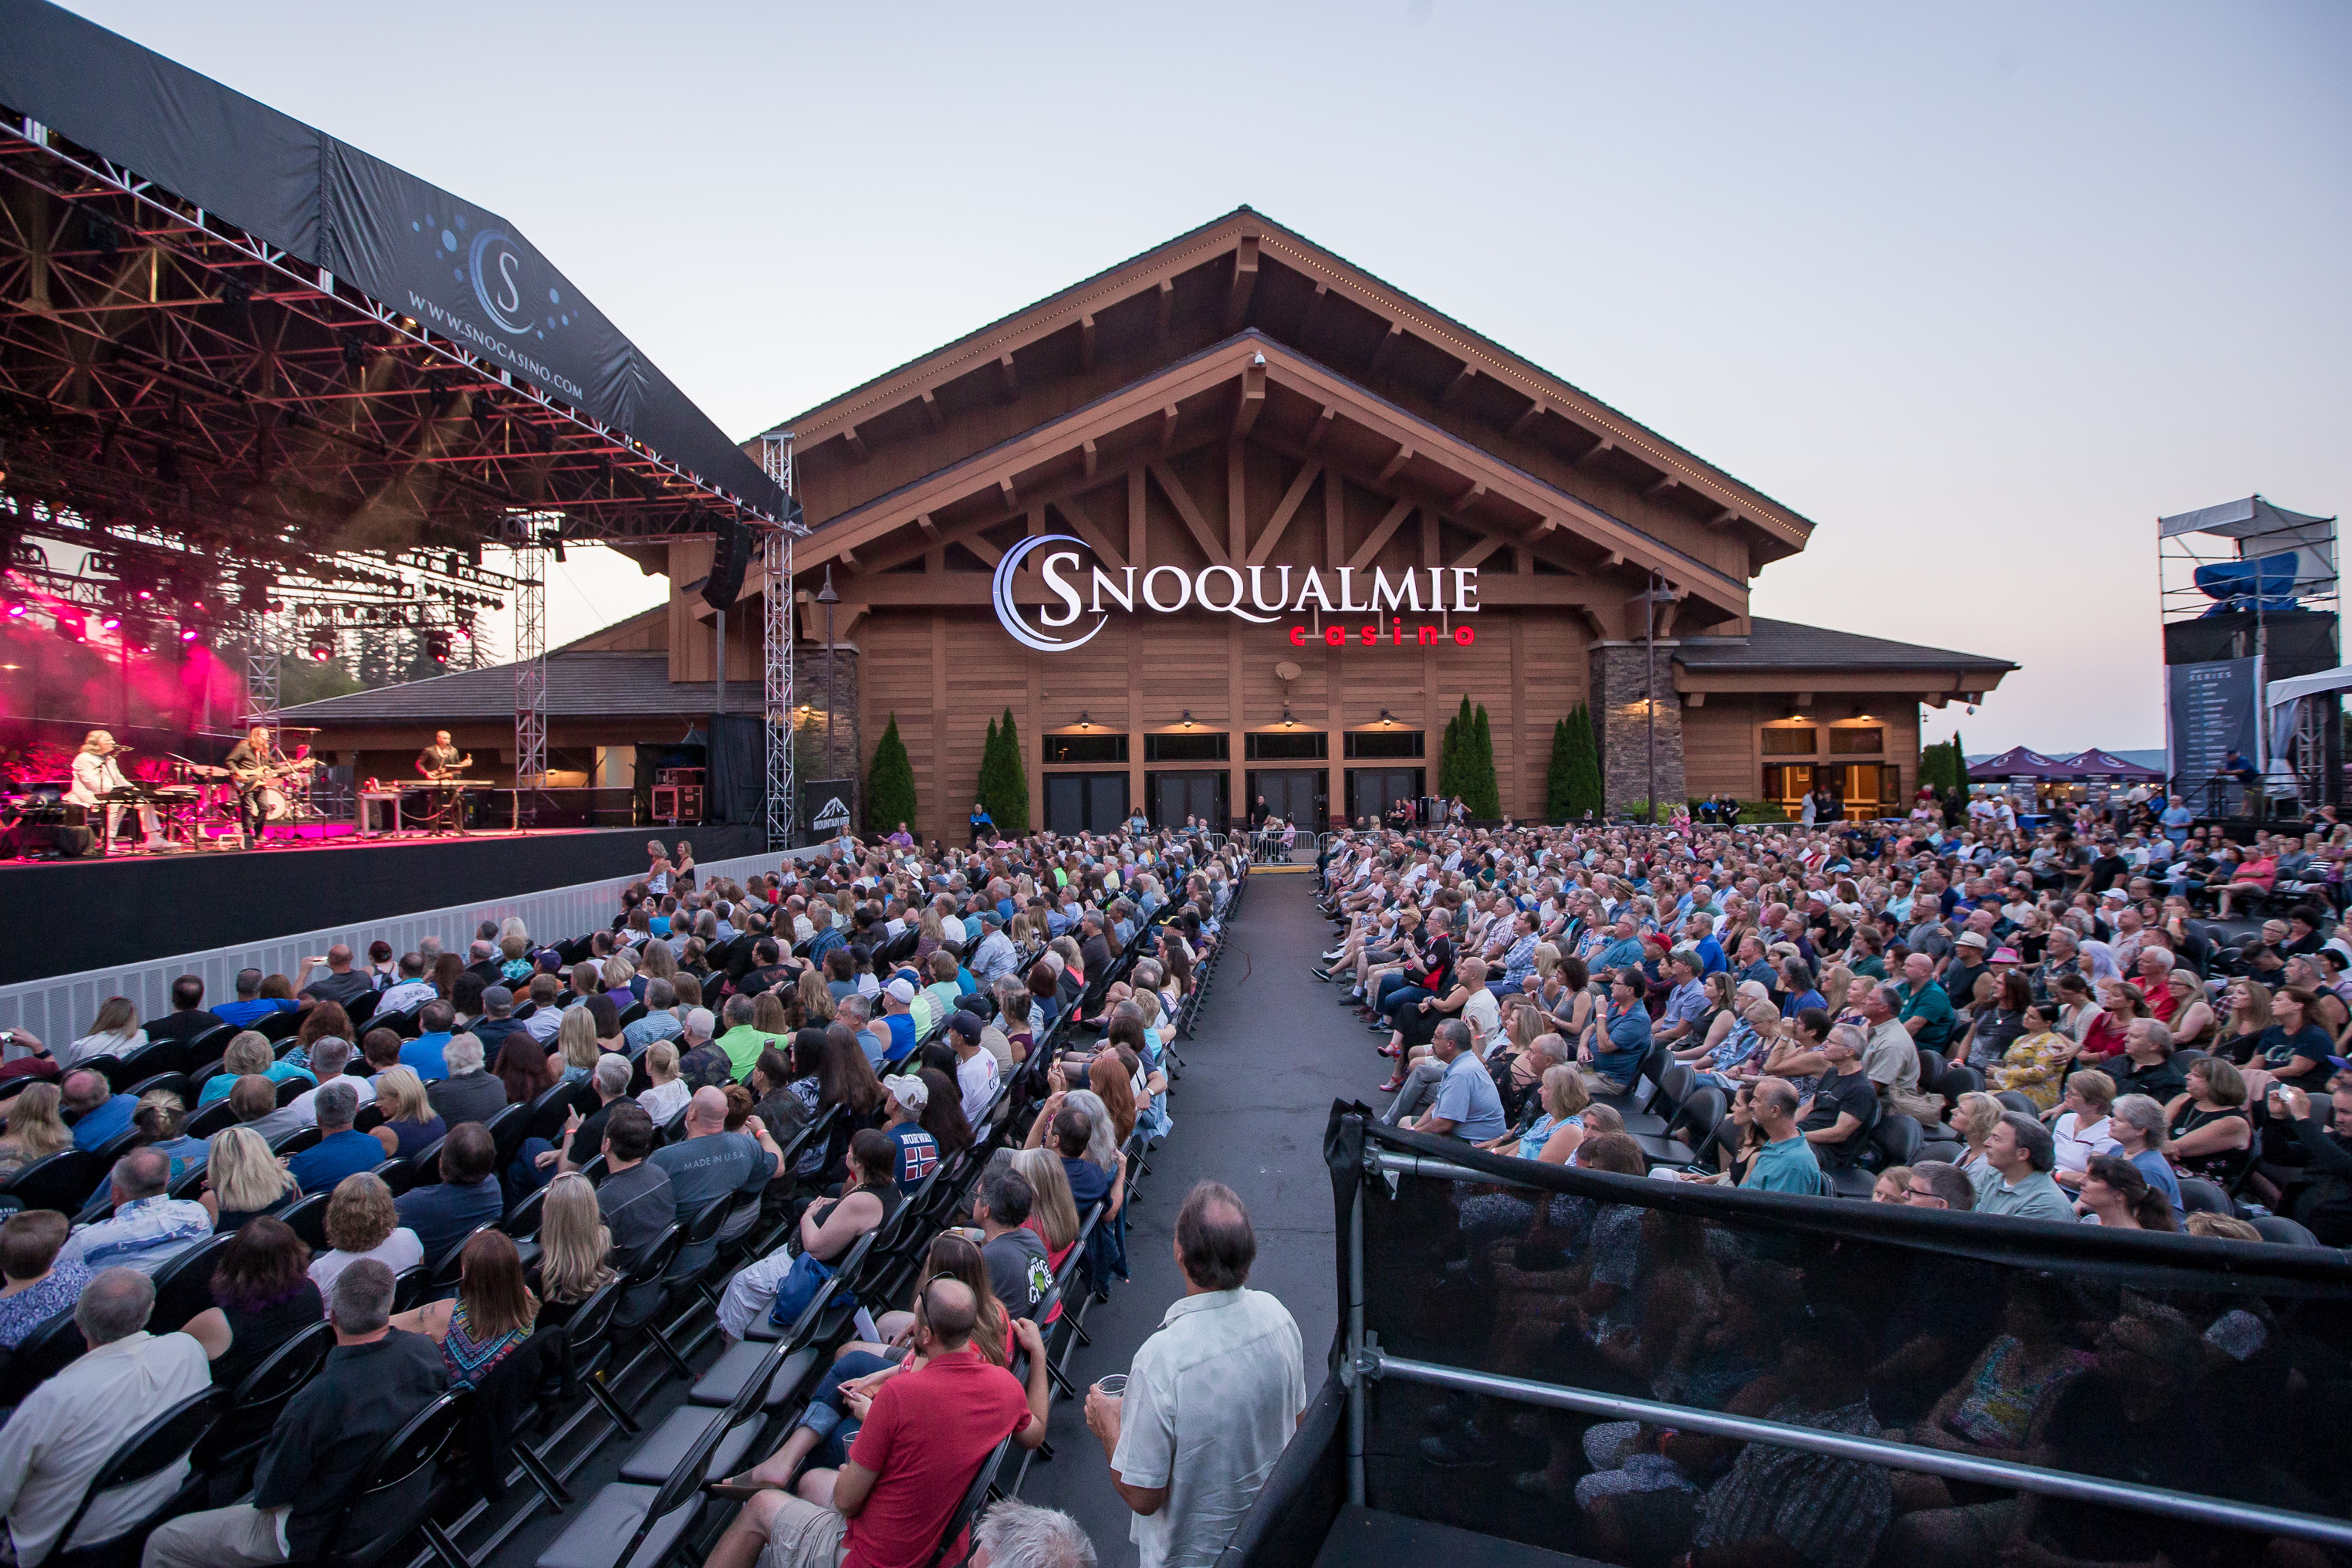 where to stay overnight snoqualmie casino